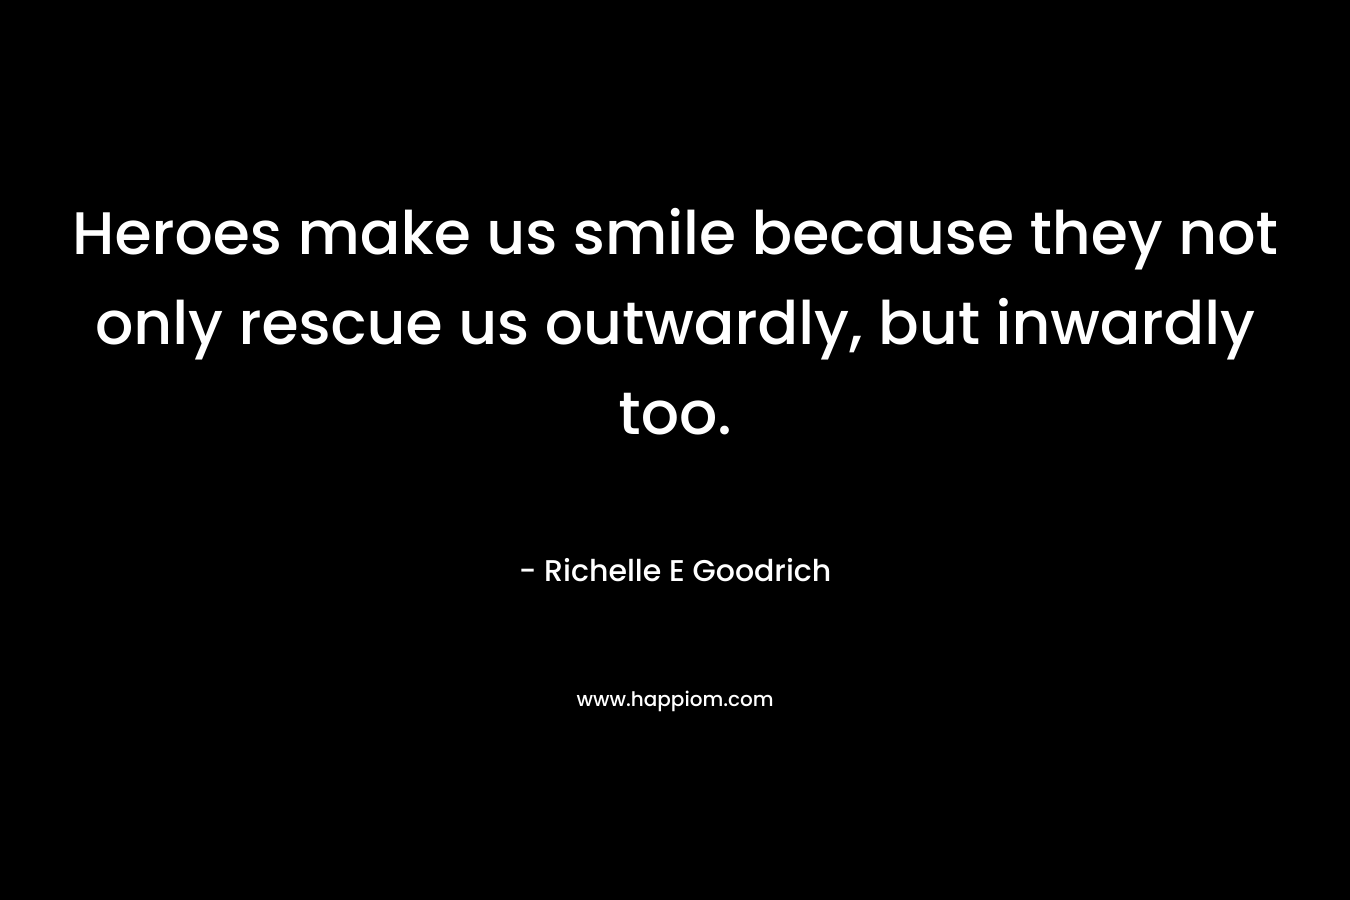 Heroes make us smile because they not only rescue us outwardly, but inwardly too.